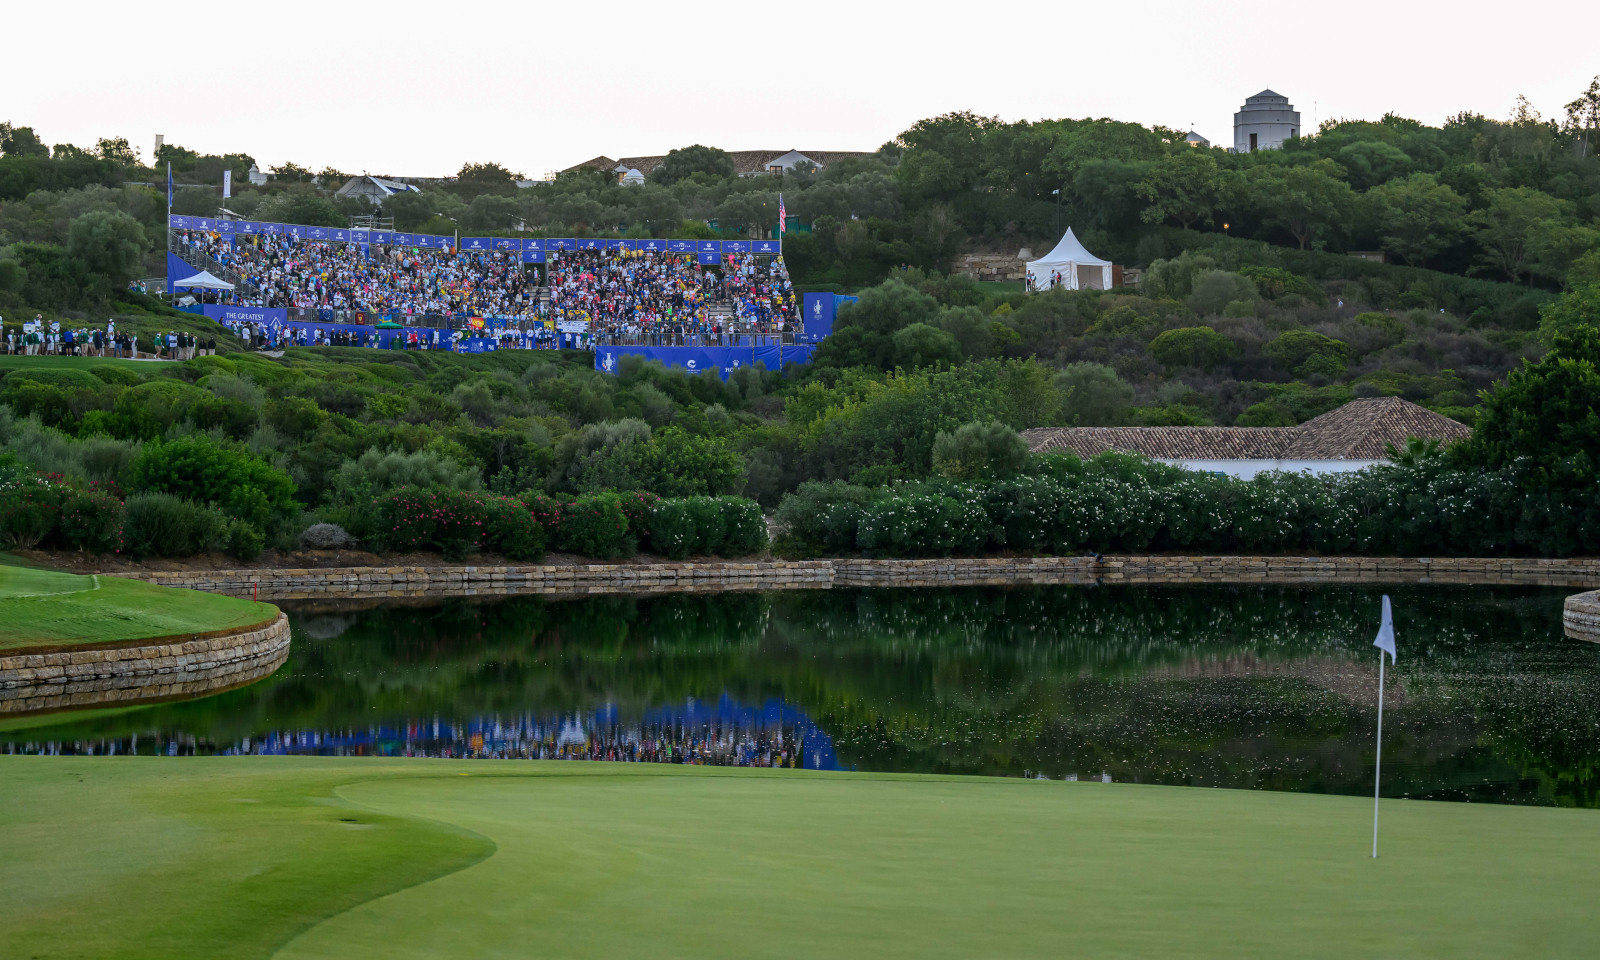 A view of the 1st green and grandstand during the Solheim Cup